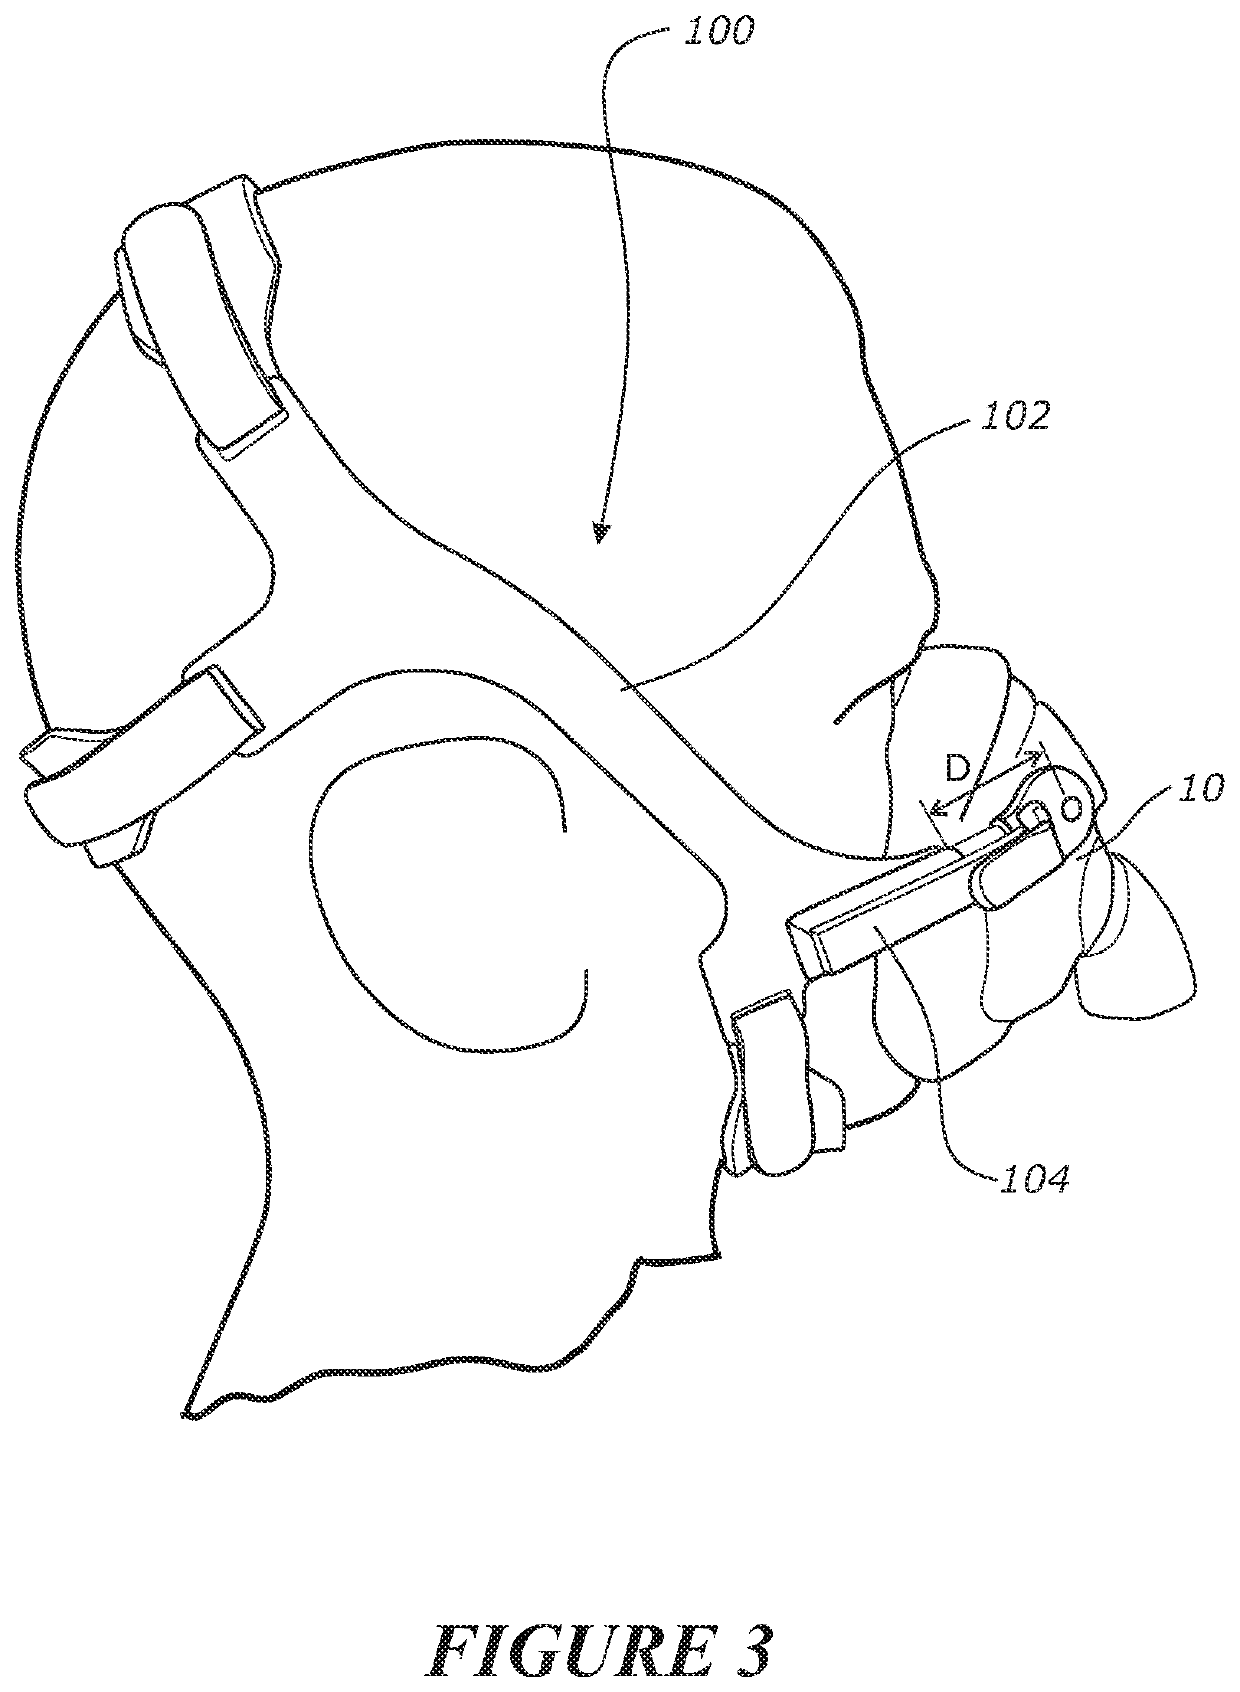 Headgear assembly with semi-rigid side arms